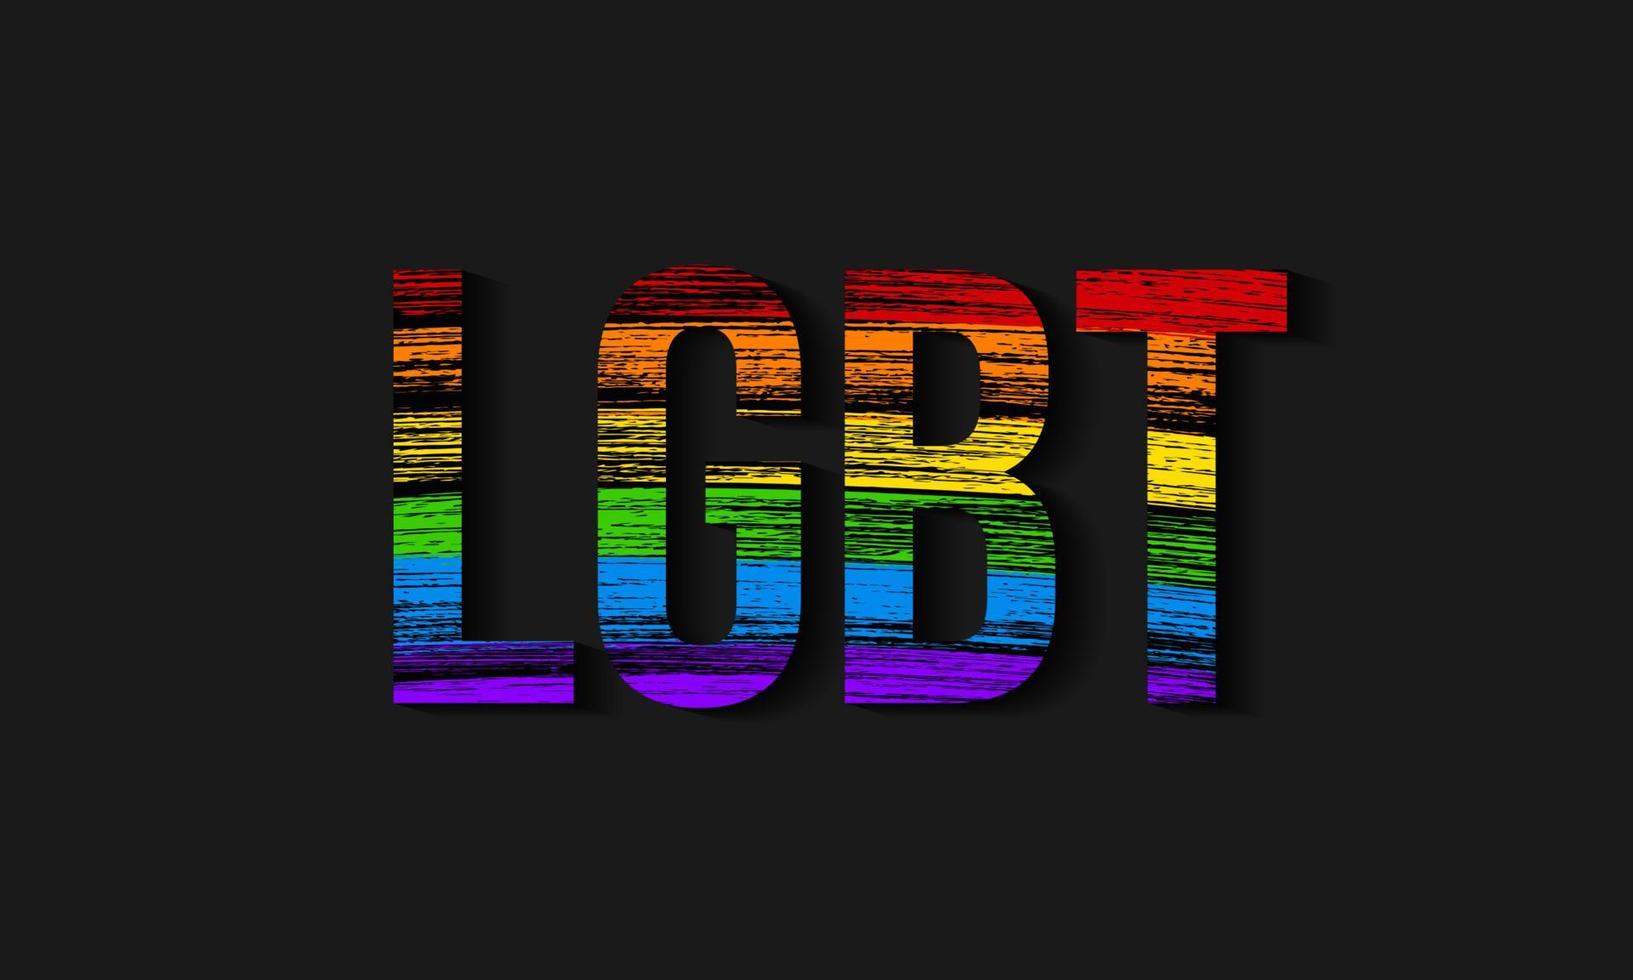 Symbol of lesbian, gay pride, bisexual, transgender social movements. LGBT community flag. Pencil strokes texture the colors of the rainbow. Easy to edit vector design template.